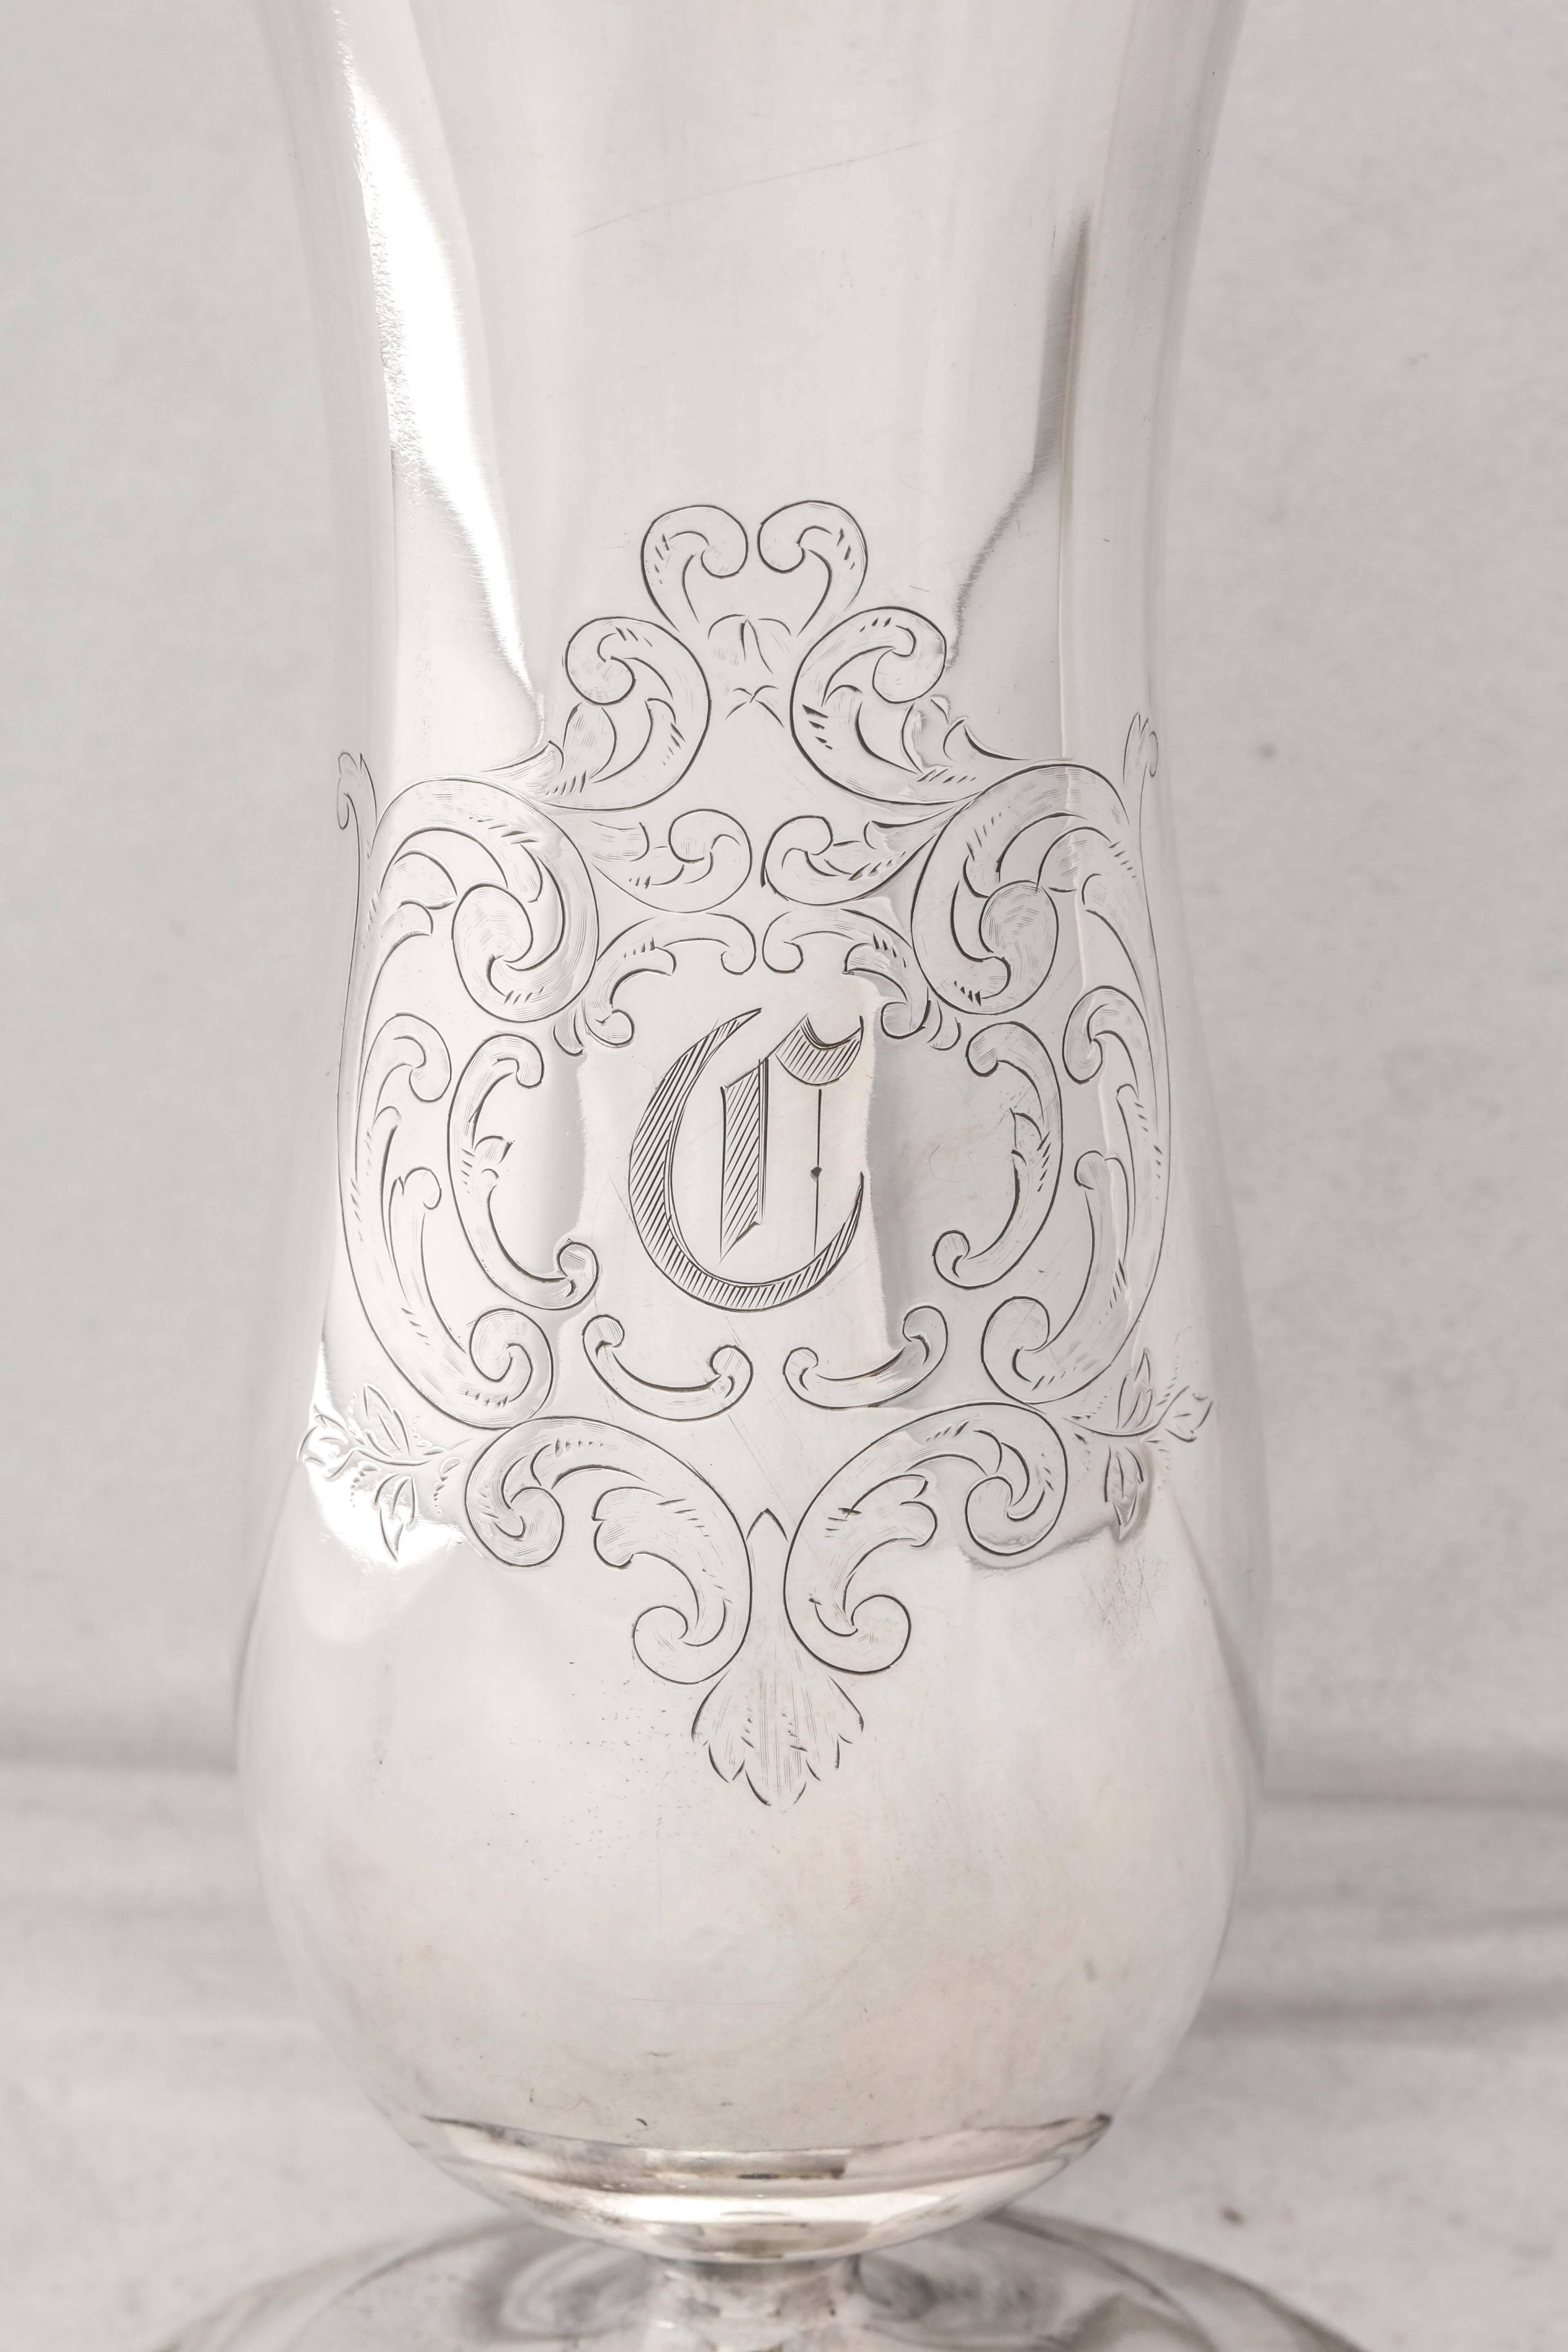 Edwardian, sterling silver vase, Frank M. Whiting & Co., Attleboro, Mass., circa 1910. Measures: 8 inches high x 3 1/2 inches diameter across base. Lovely etching surrounds a cartouche that has been monogrammed with an Old English letter ‘C’. Dark